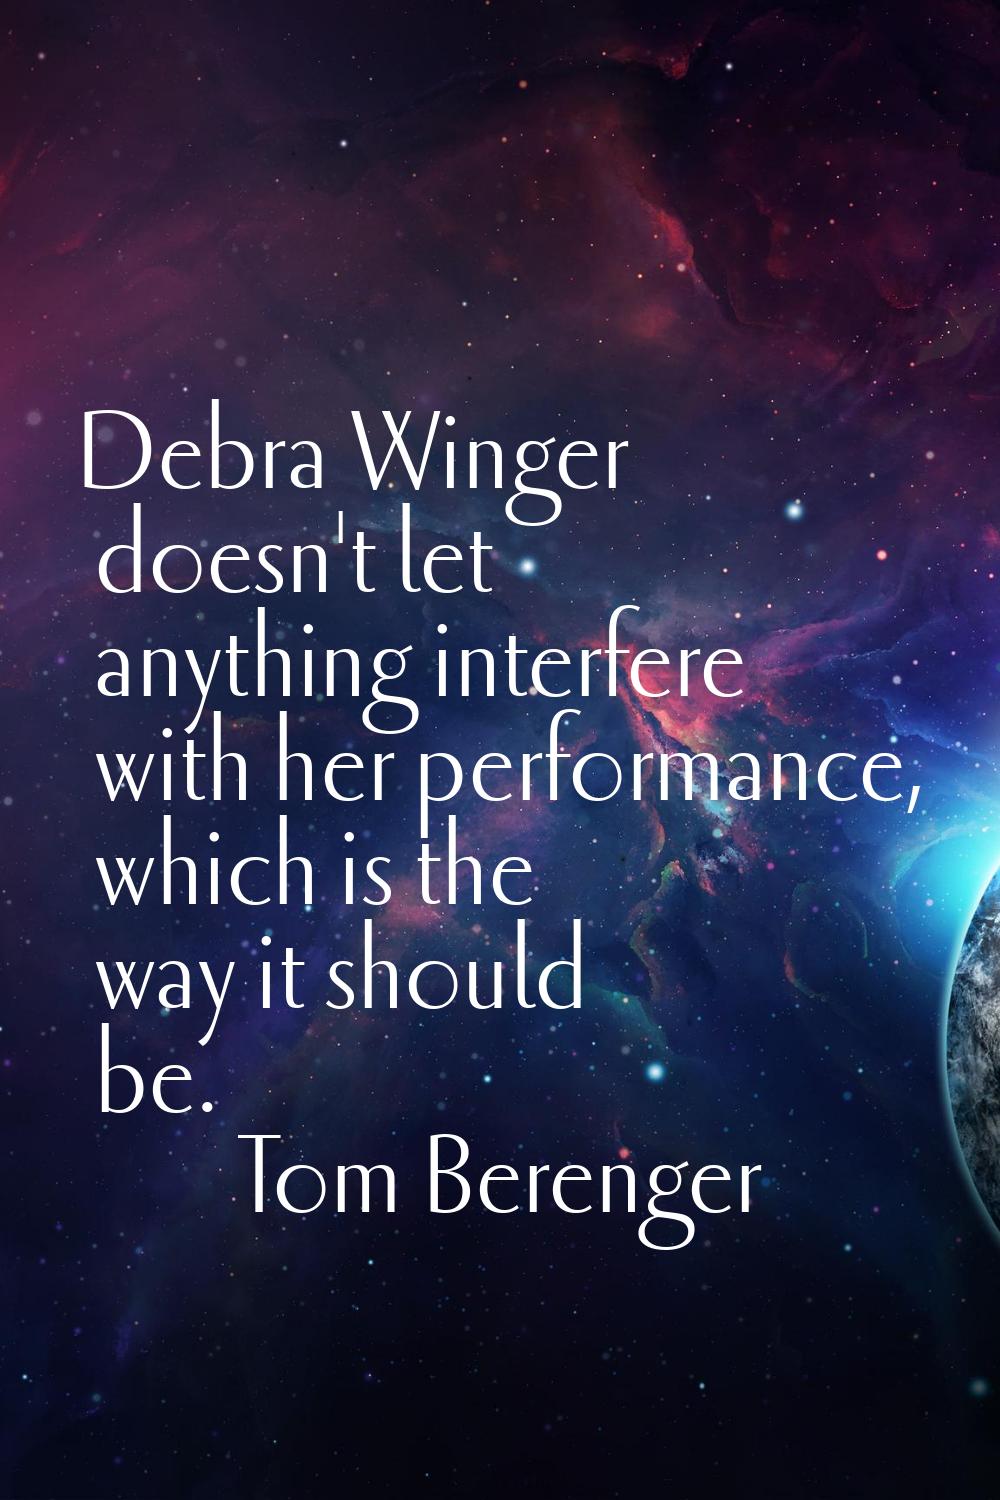 Debra Winger doesn't let anything interfere with her performance, which is the way it should be.